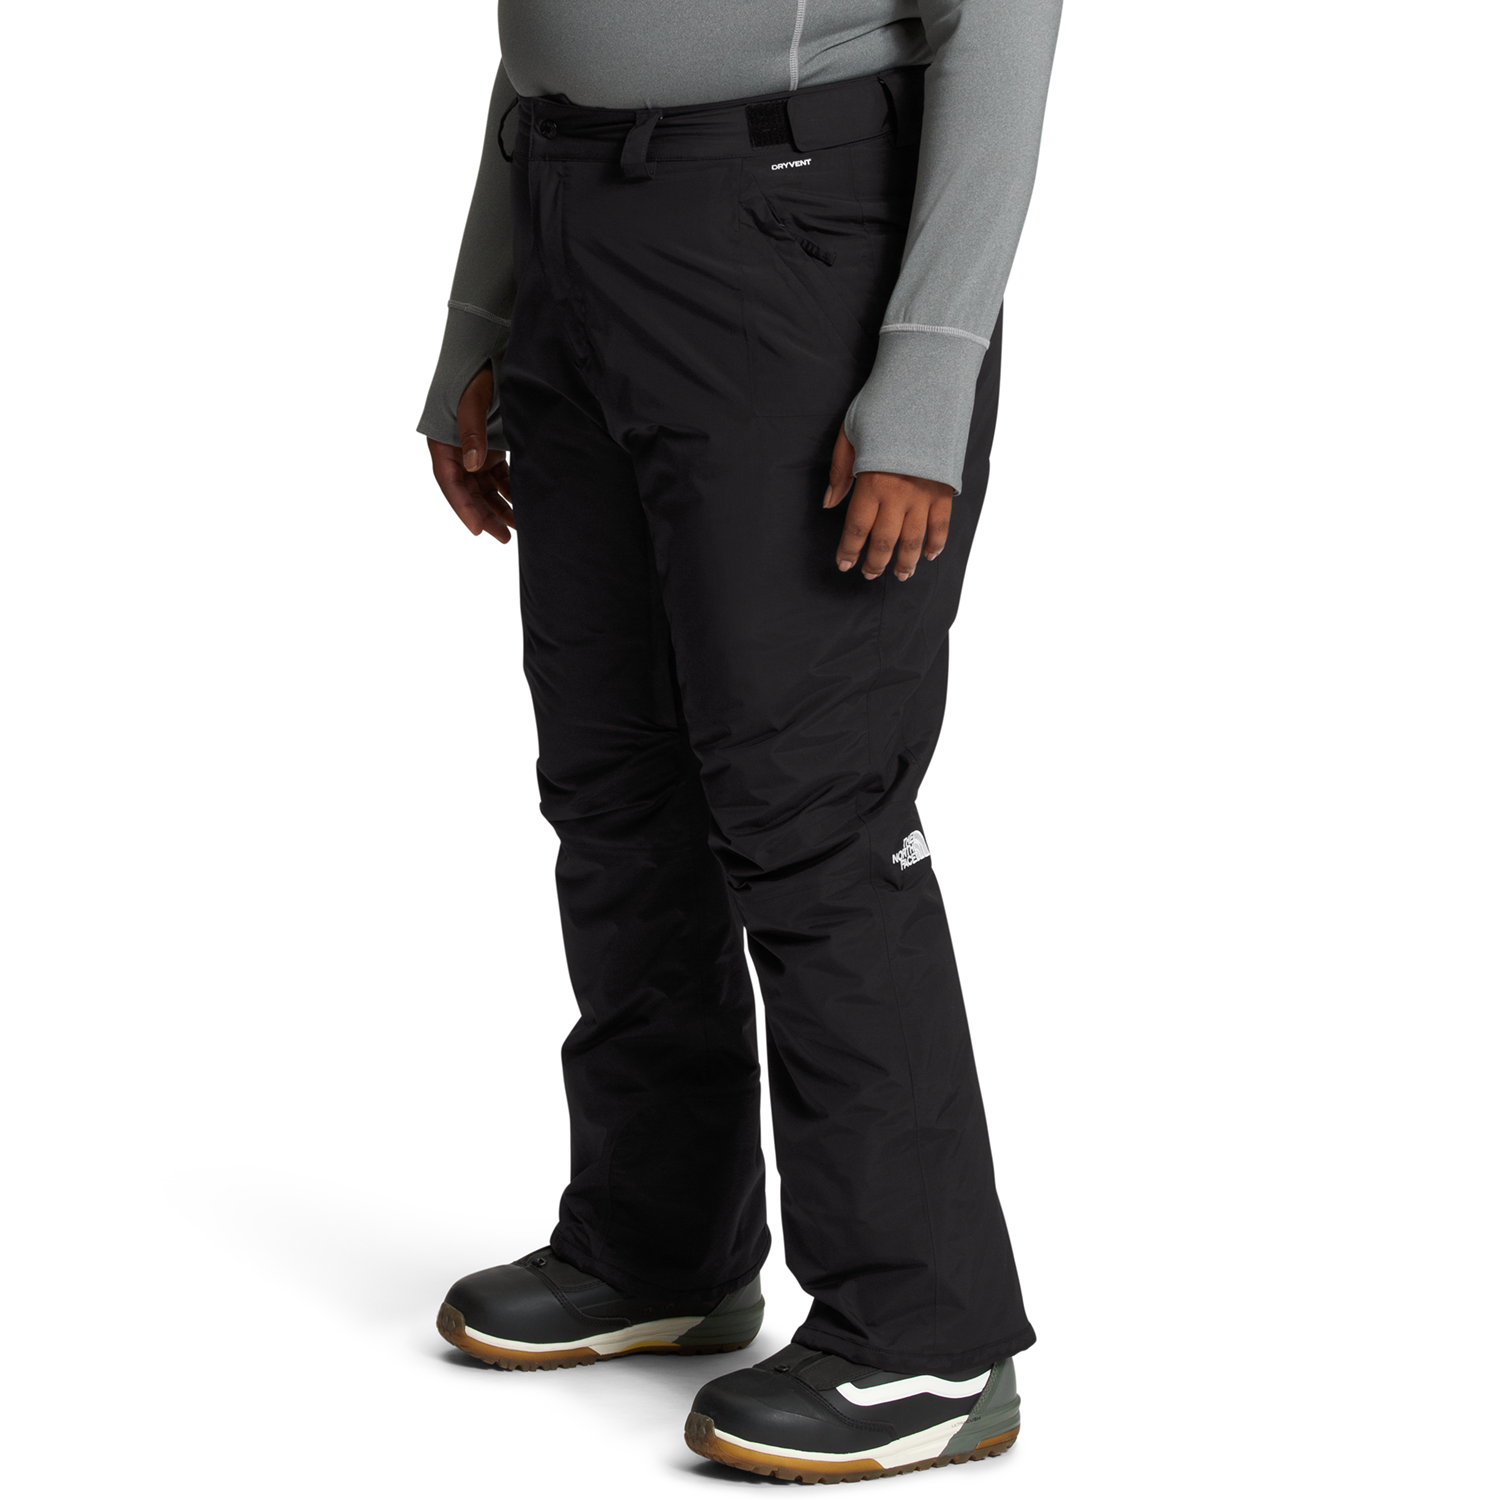 The North Face Freedom Insulated Plus Pants - Women's